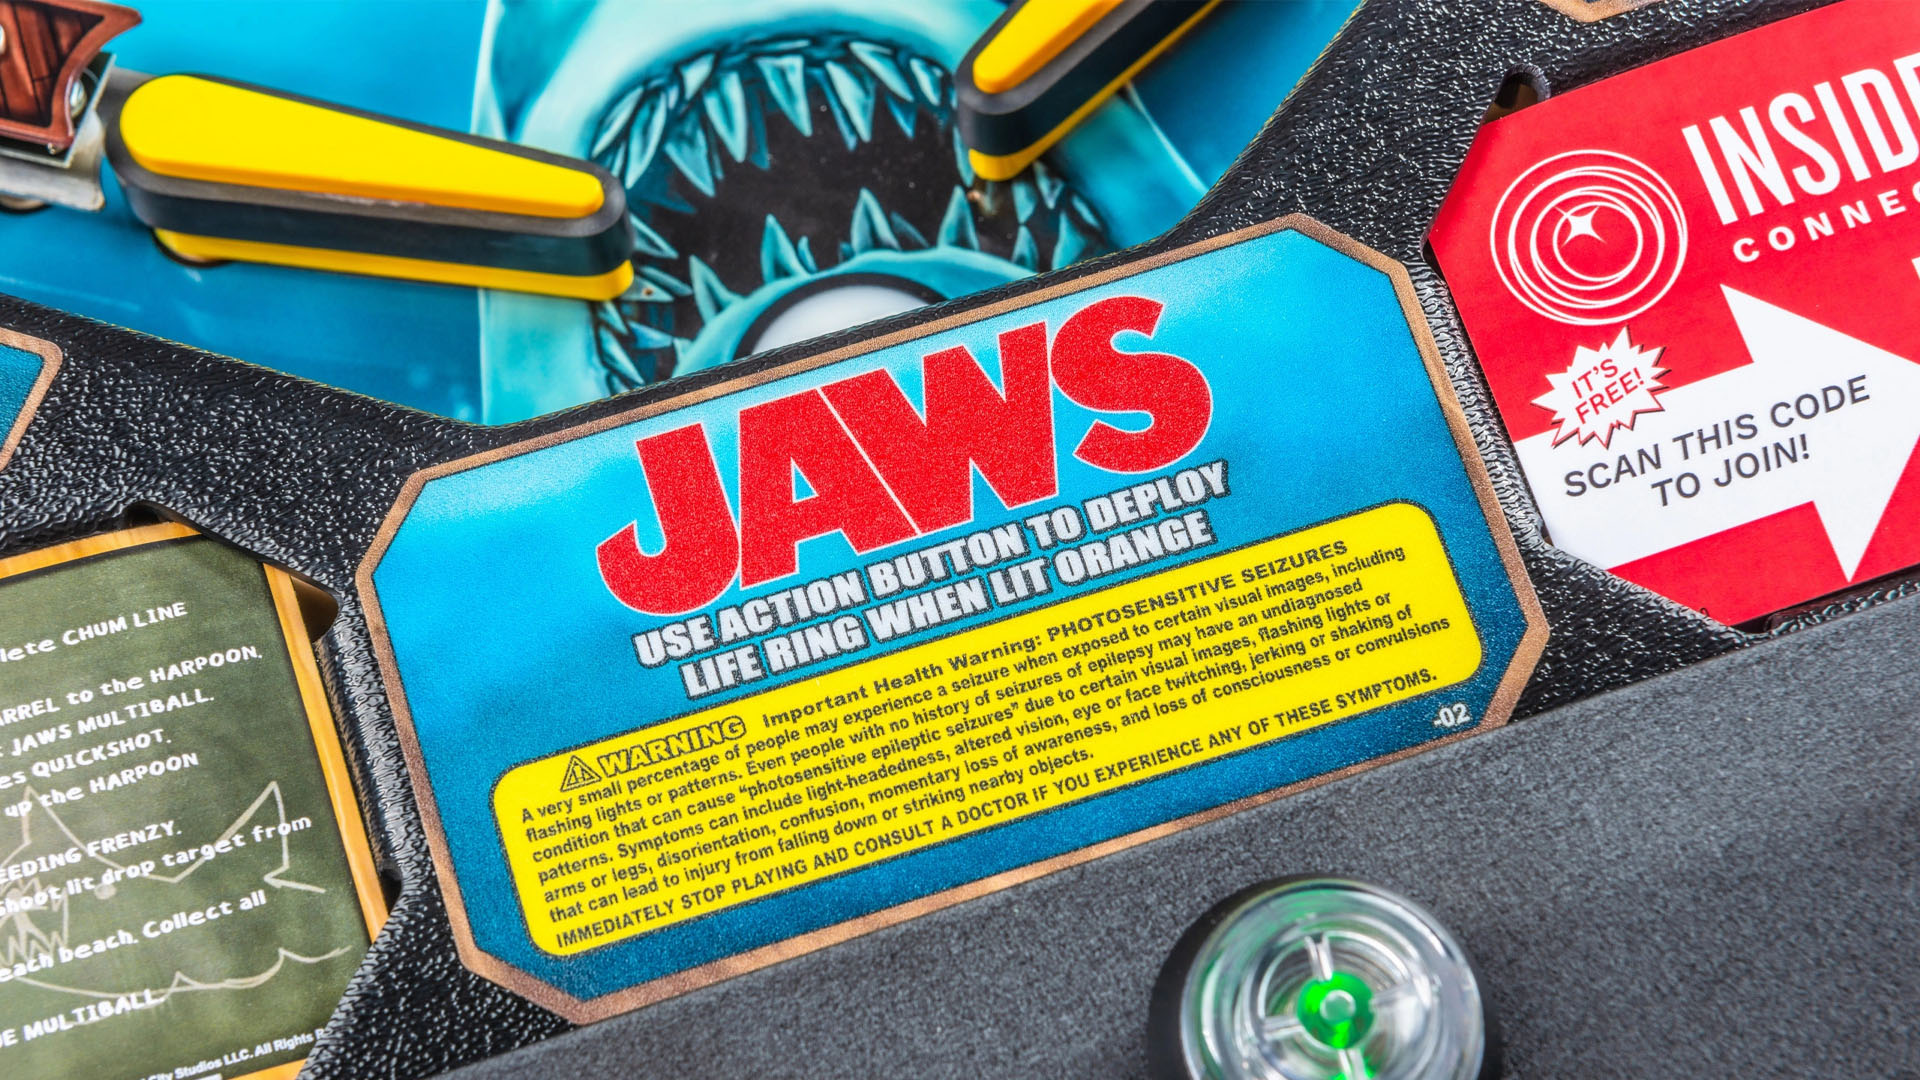 JAWS Pro Now Out at Two Locations